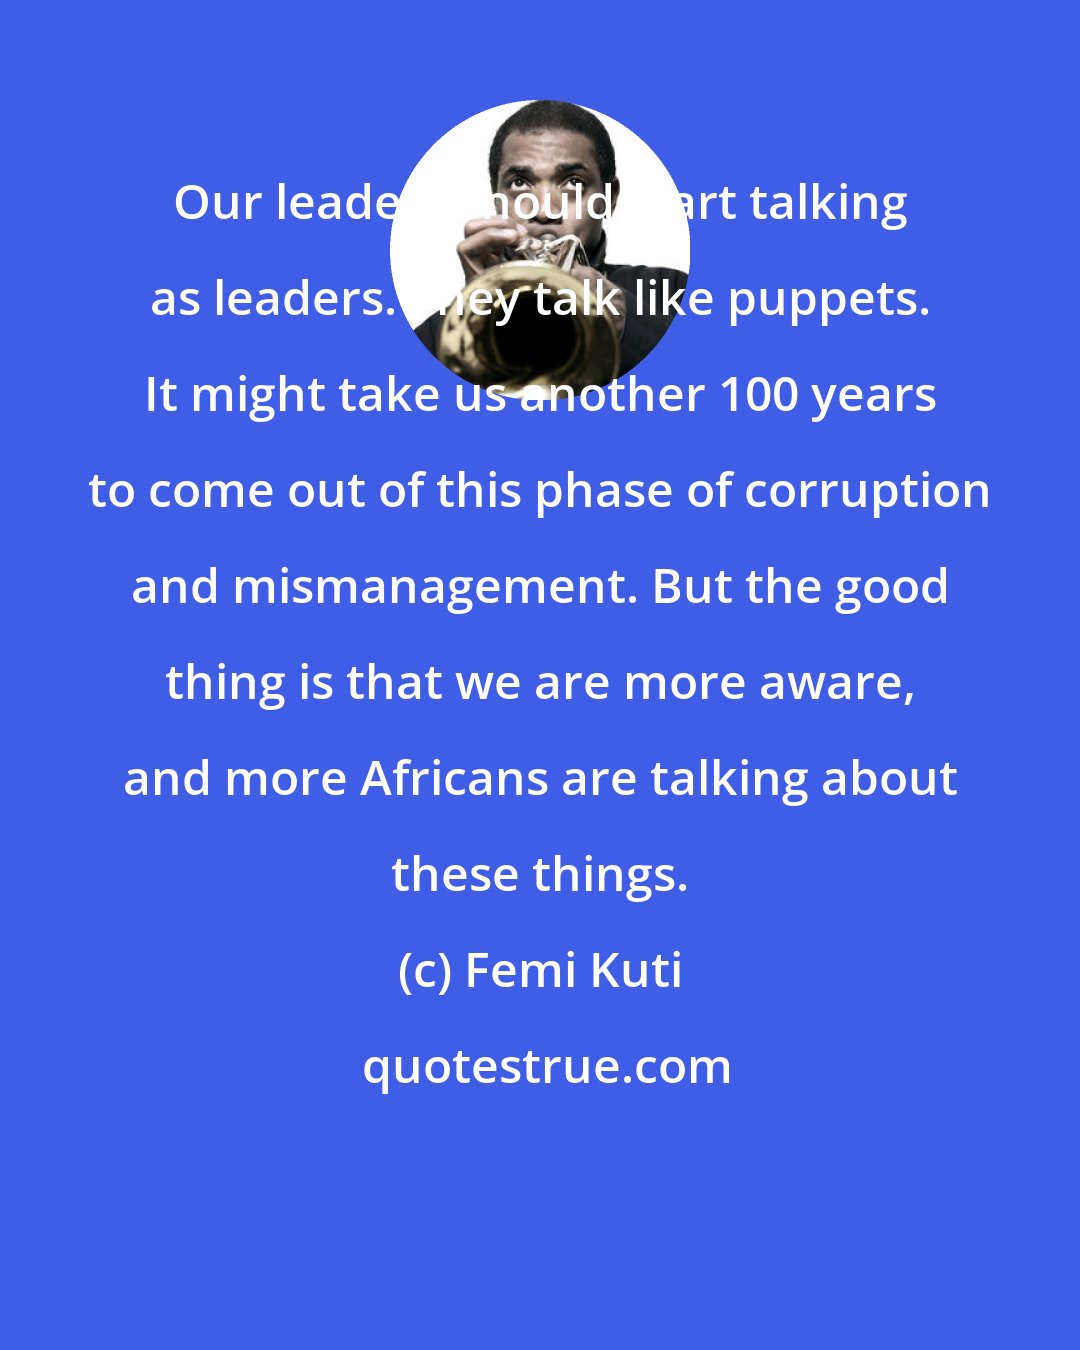 Femi Kuti: Our leaders should start talking as leaders. They talk like puppets. It might take us another 100 years to come out of this phase of corruption and mismanagement. But the good thing is that we are more aware, and more Africans are talking about these things.